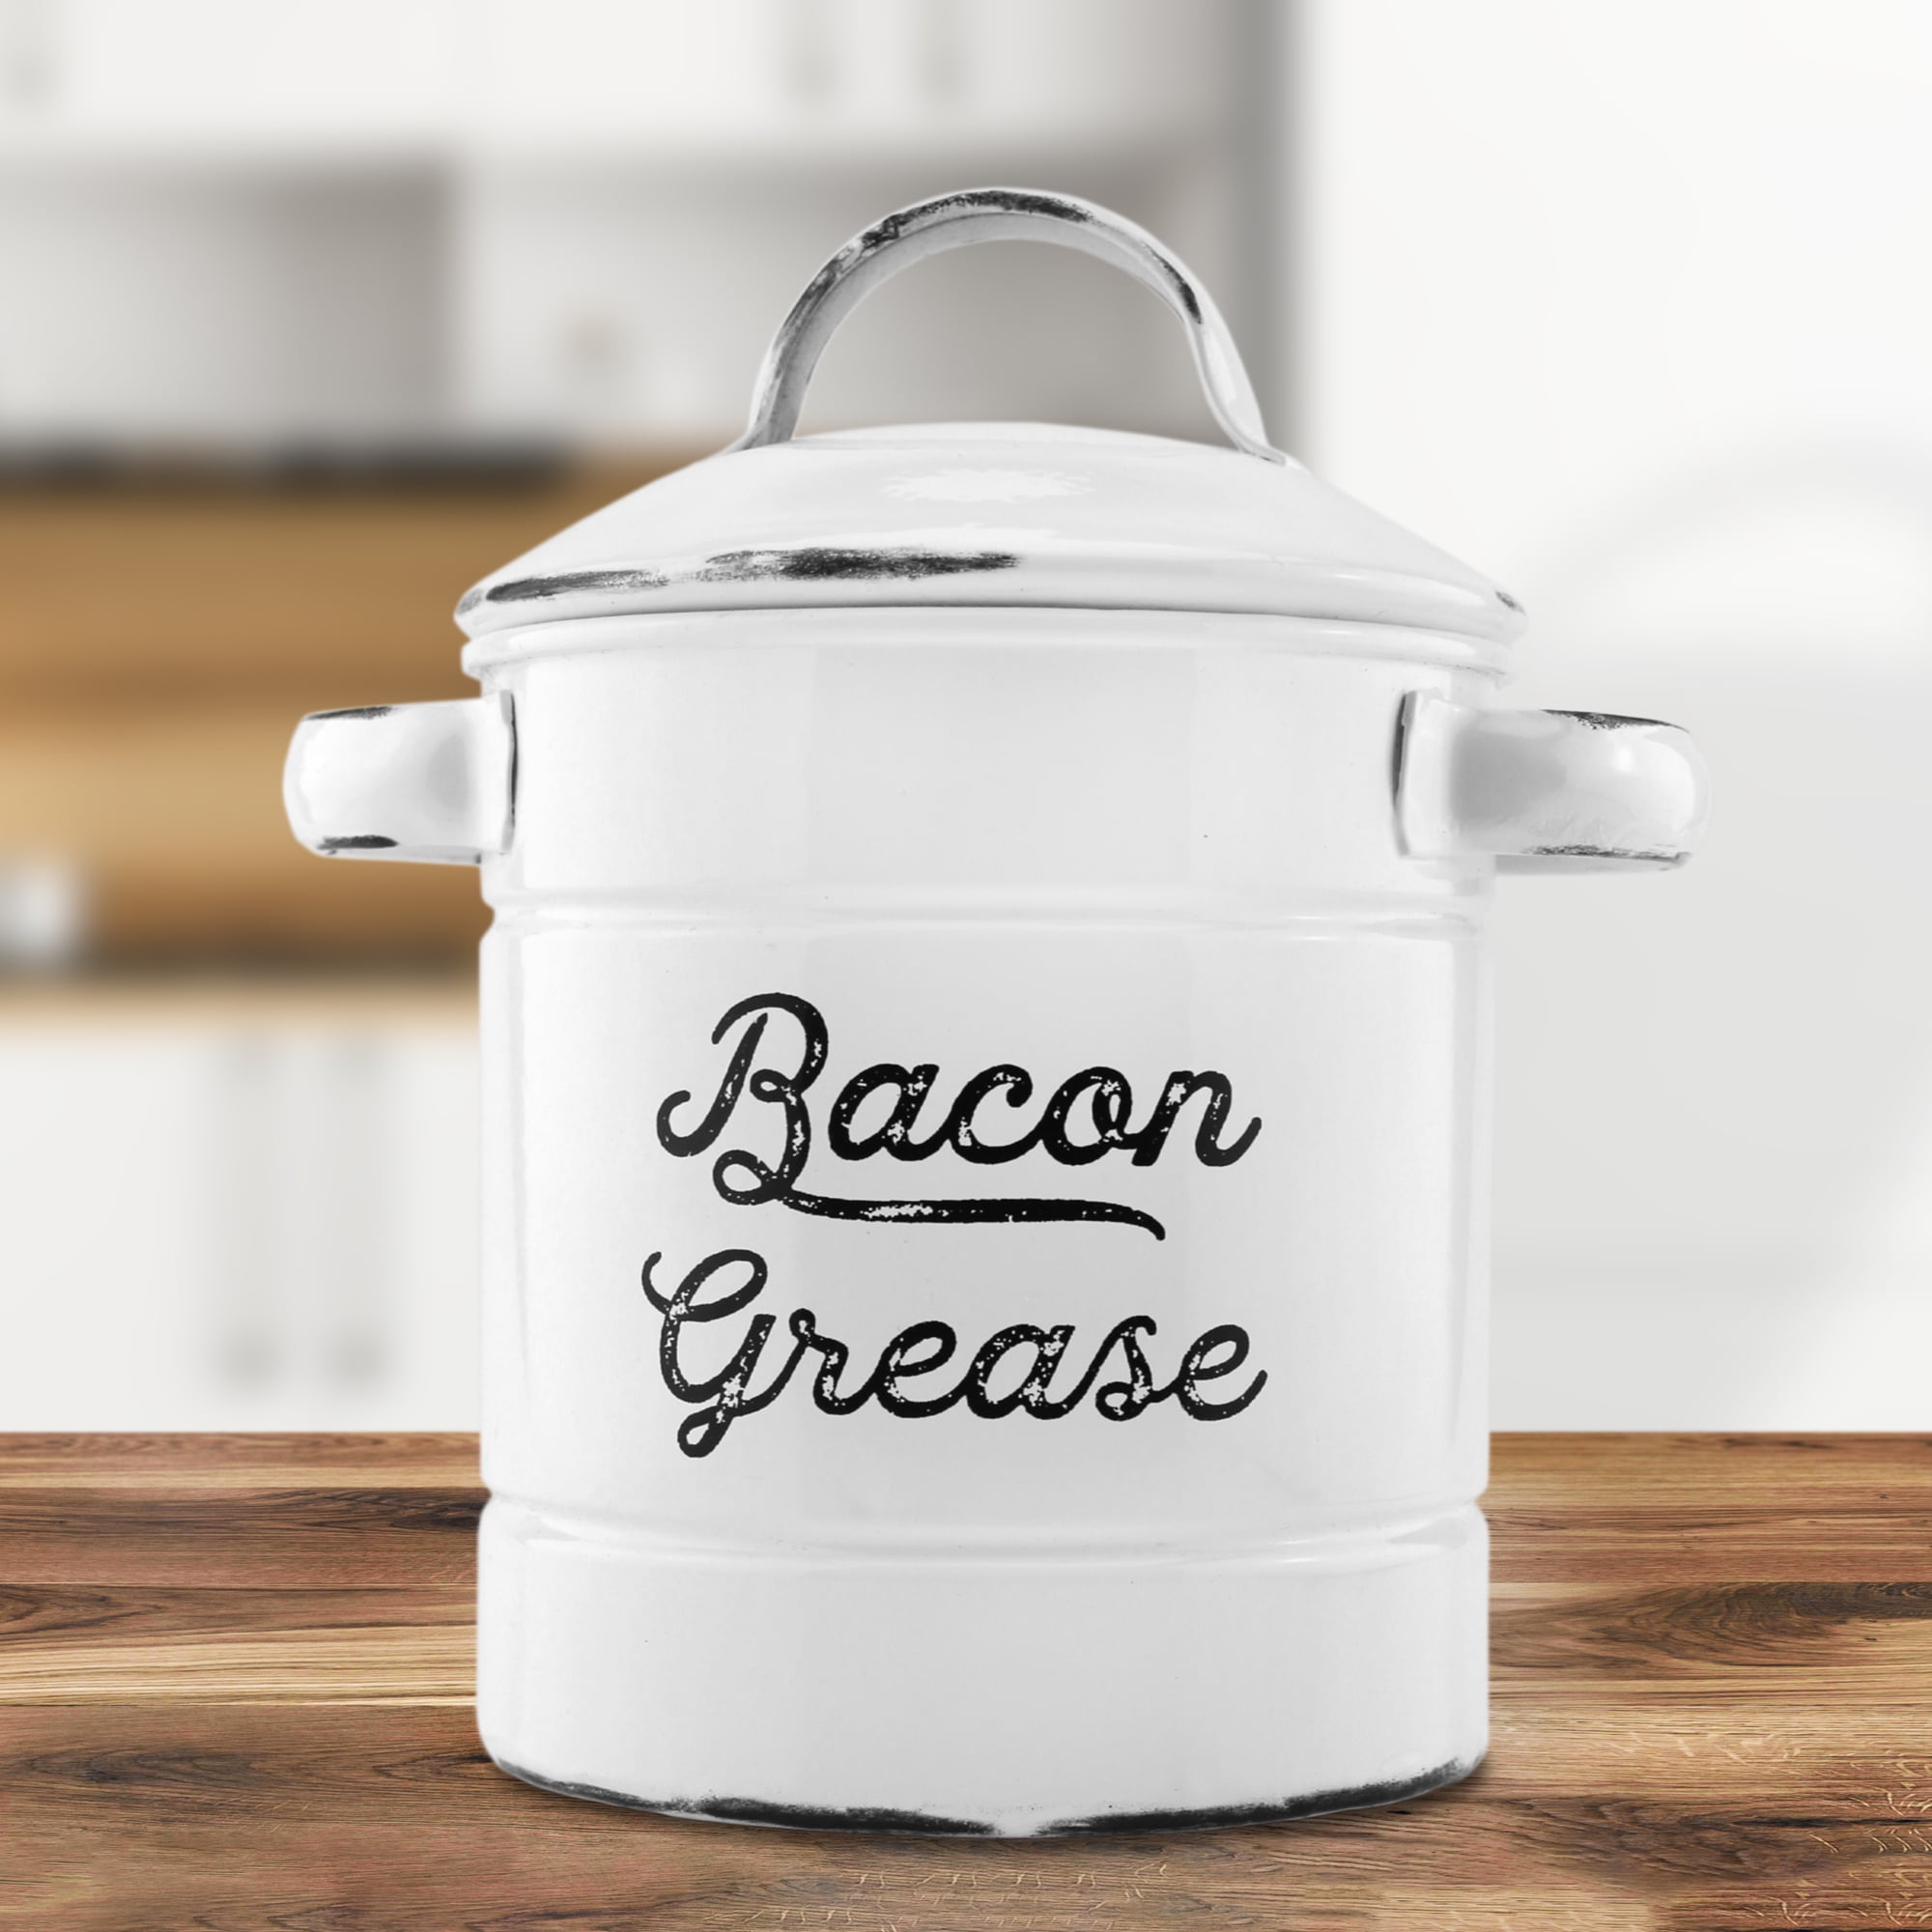 Aulett Home Bacon Grease Container with Strainer - Best for Storing Fats for Keto and Paleo, Cooking Oil and Drippings - 1.25 Quart or 5 Cups